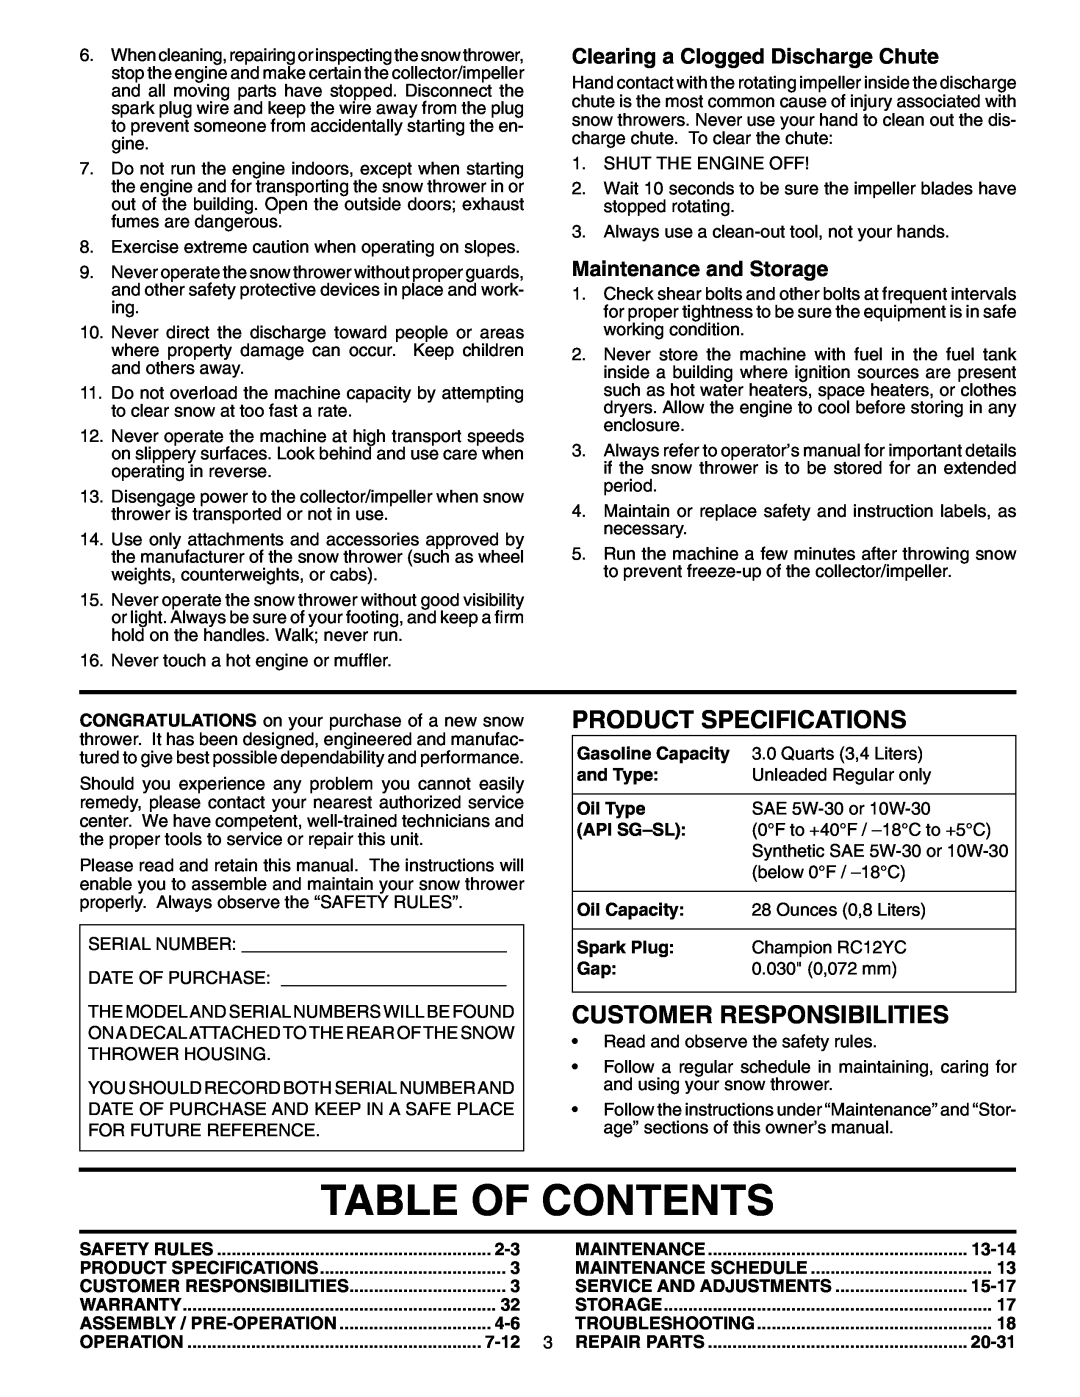 Husqvarna 5524SEB Table Of Contents, Product Specifications, Customer Responsibilities, Clearing a Clogged Discharge Chute 